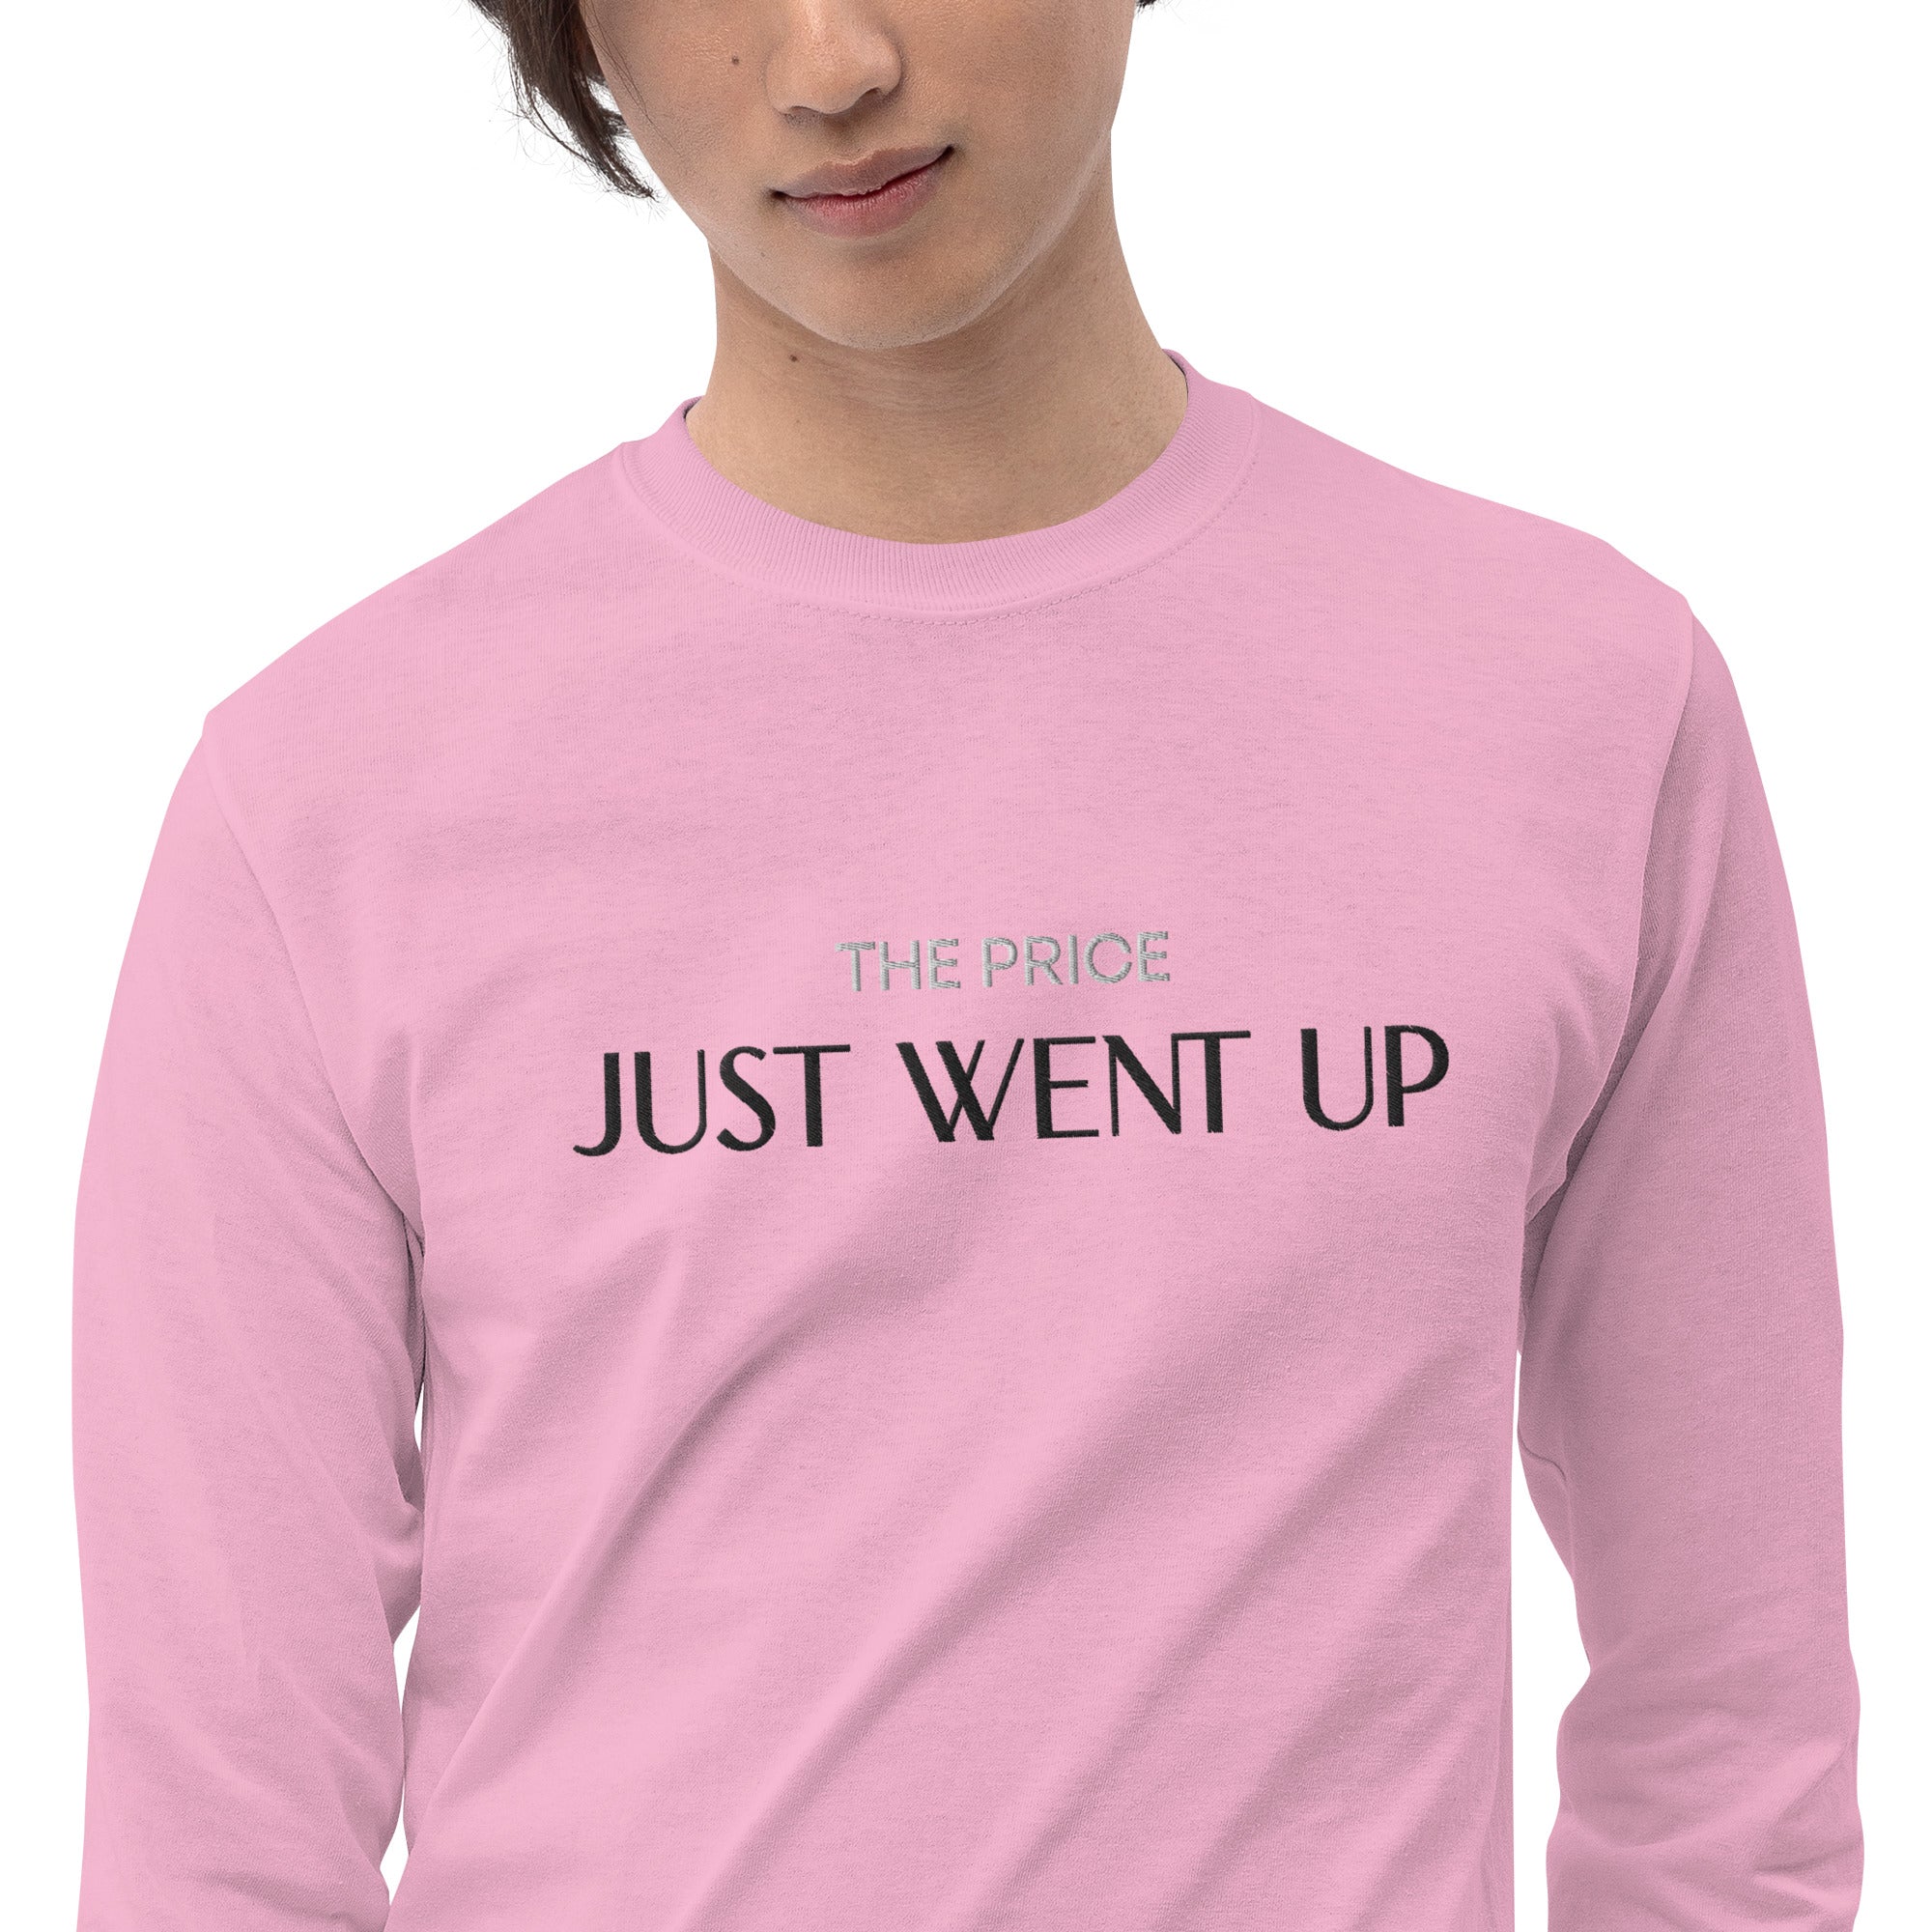 Men’s "The Price Just Went Up" Stitched Long Sleeve Shirt - THE CORNBREAD KITCHEN SHOP